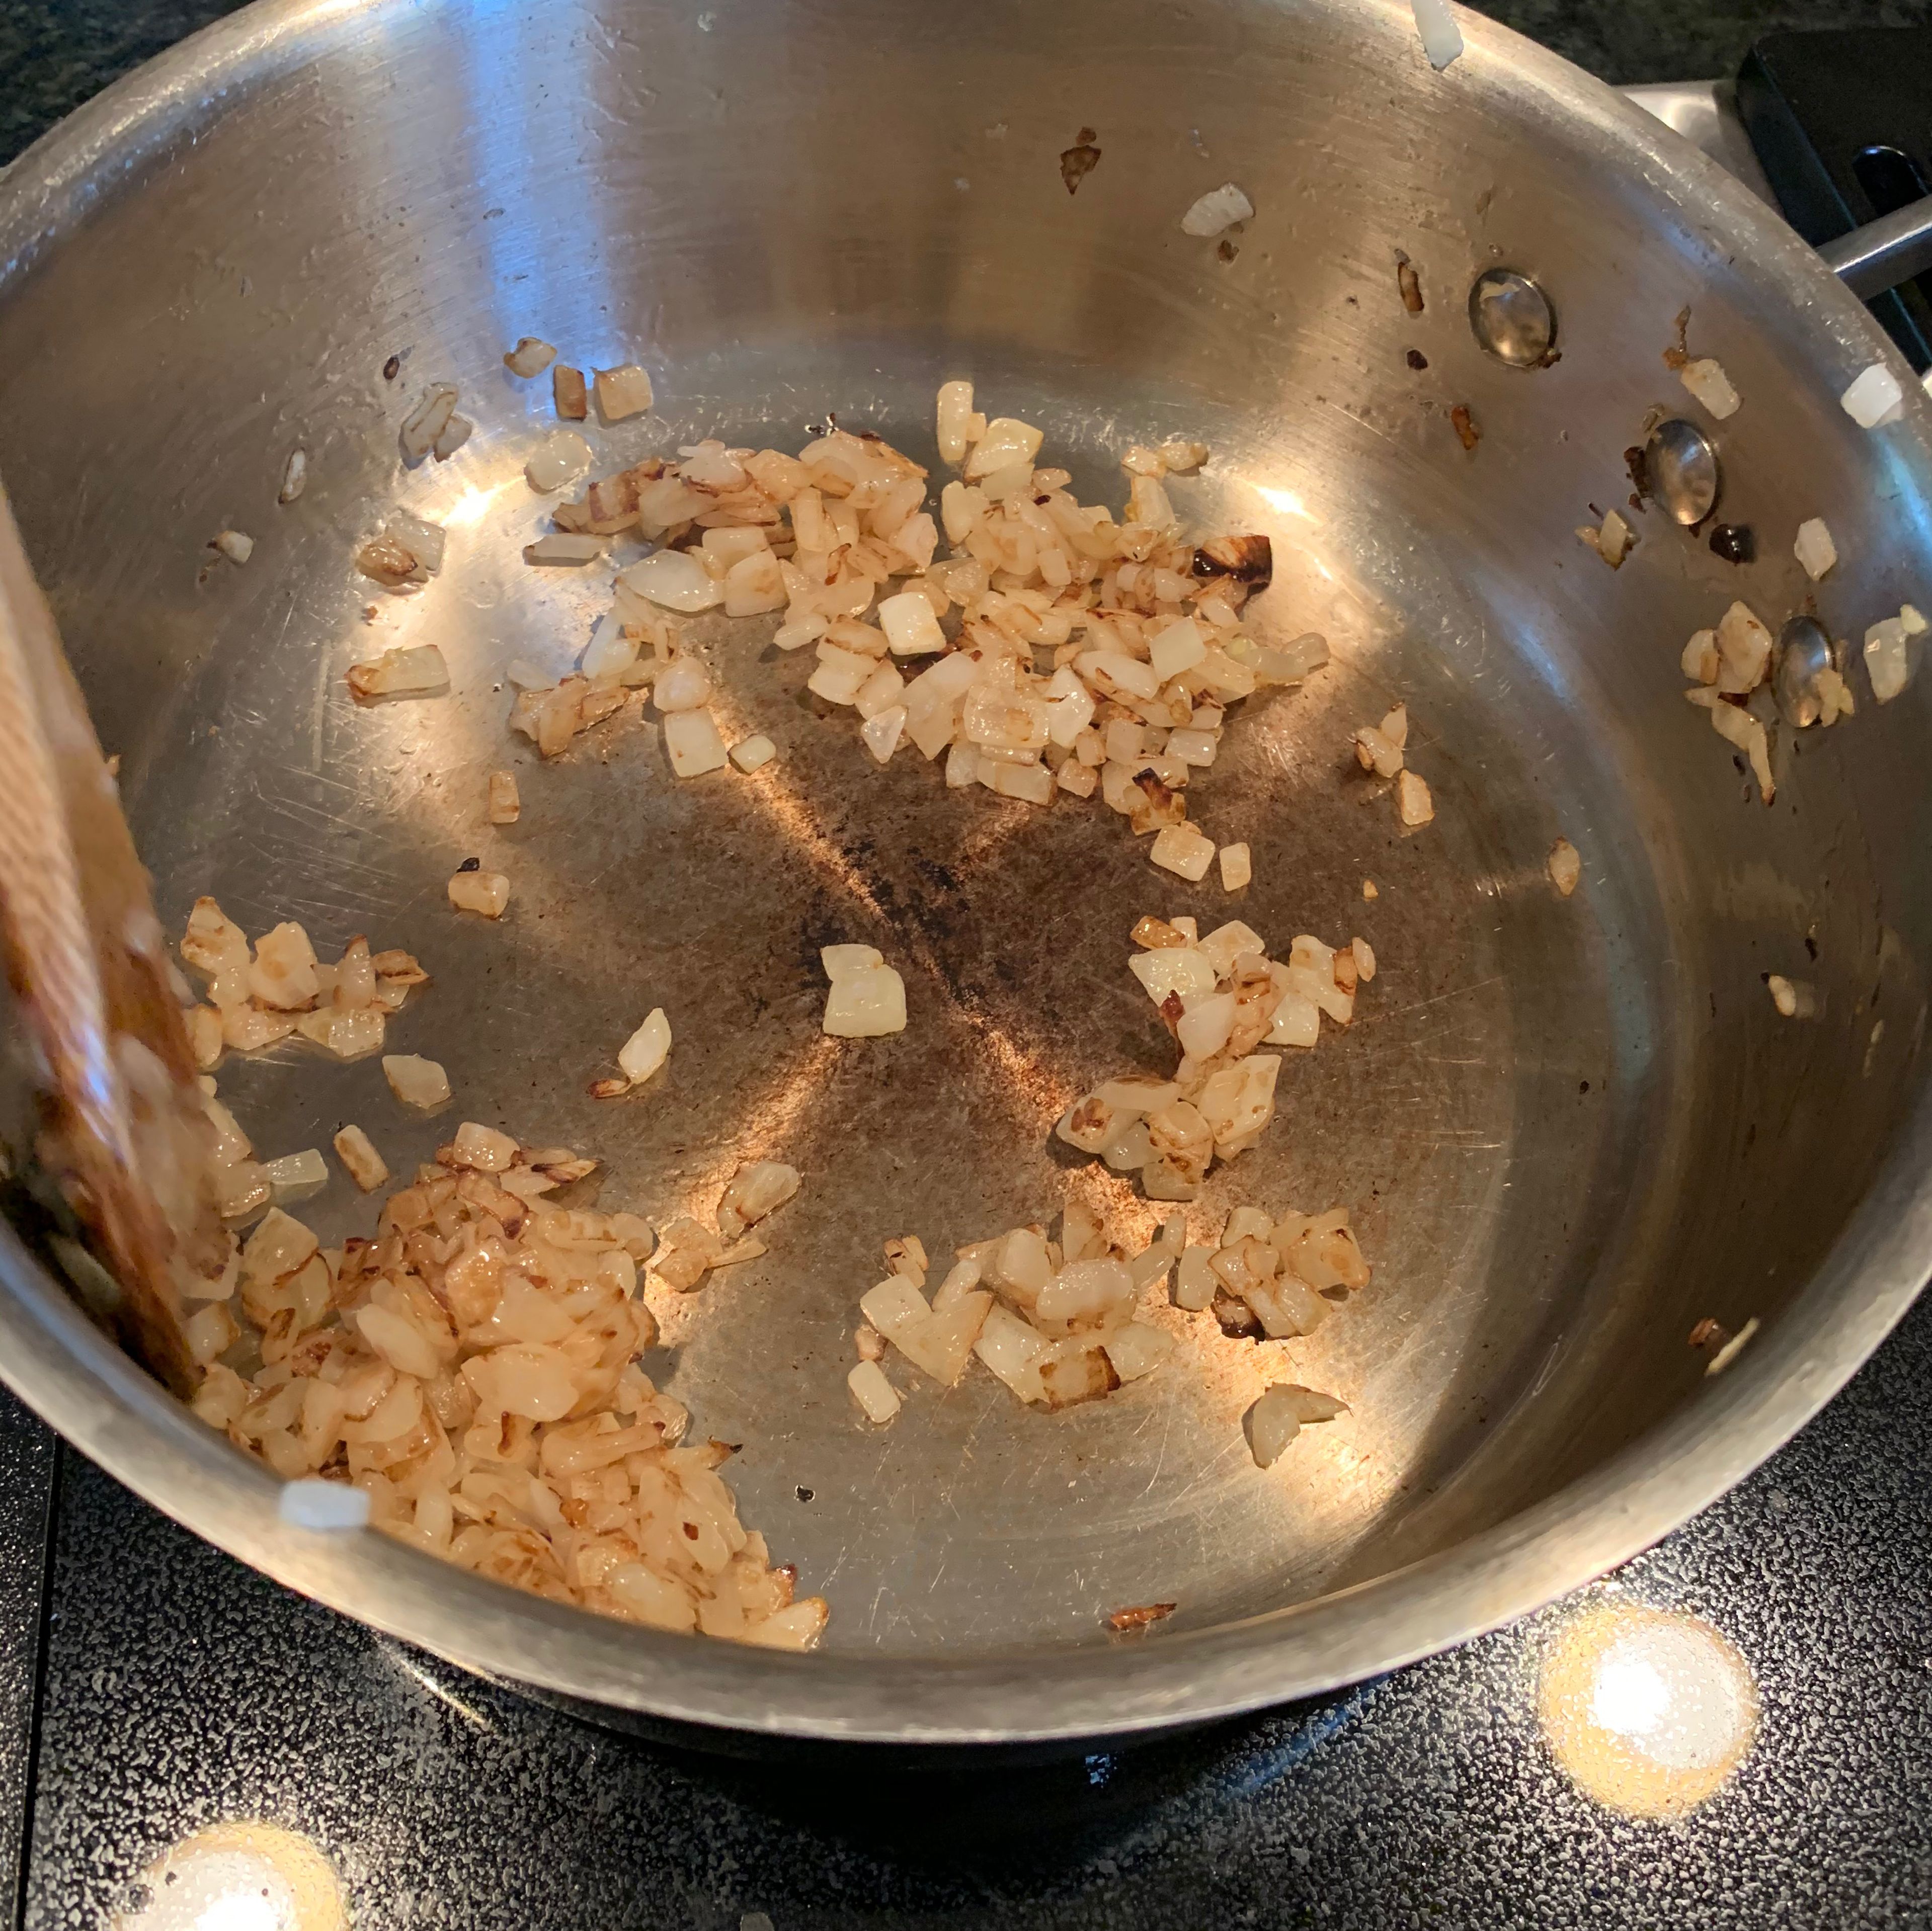 In a saucepan, caramelize the chopped onion until golden brown.